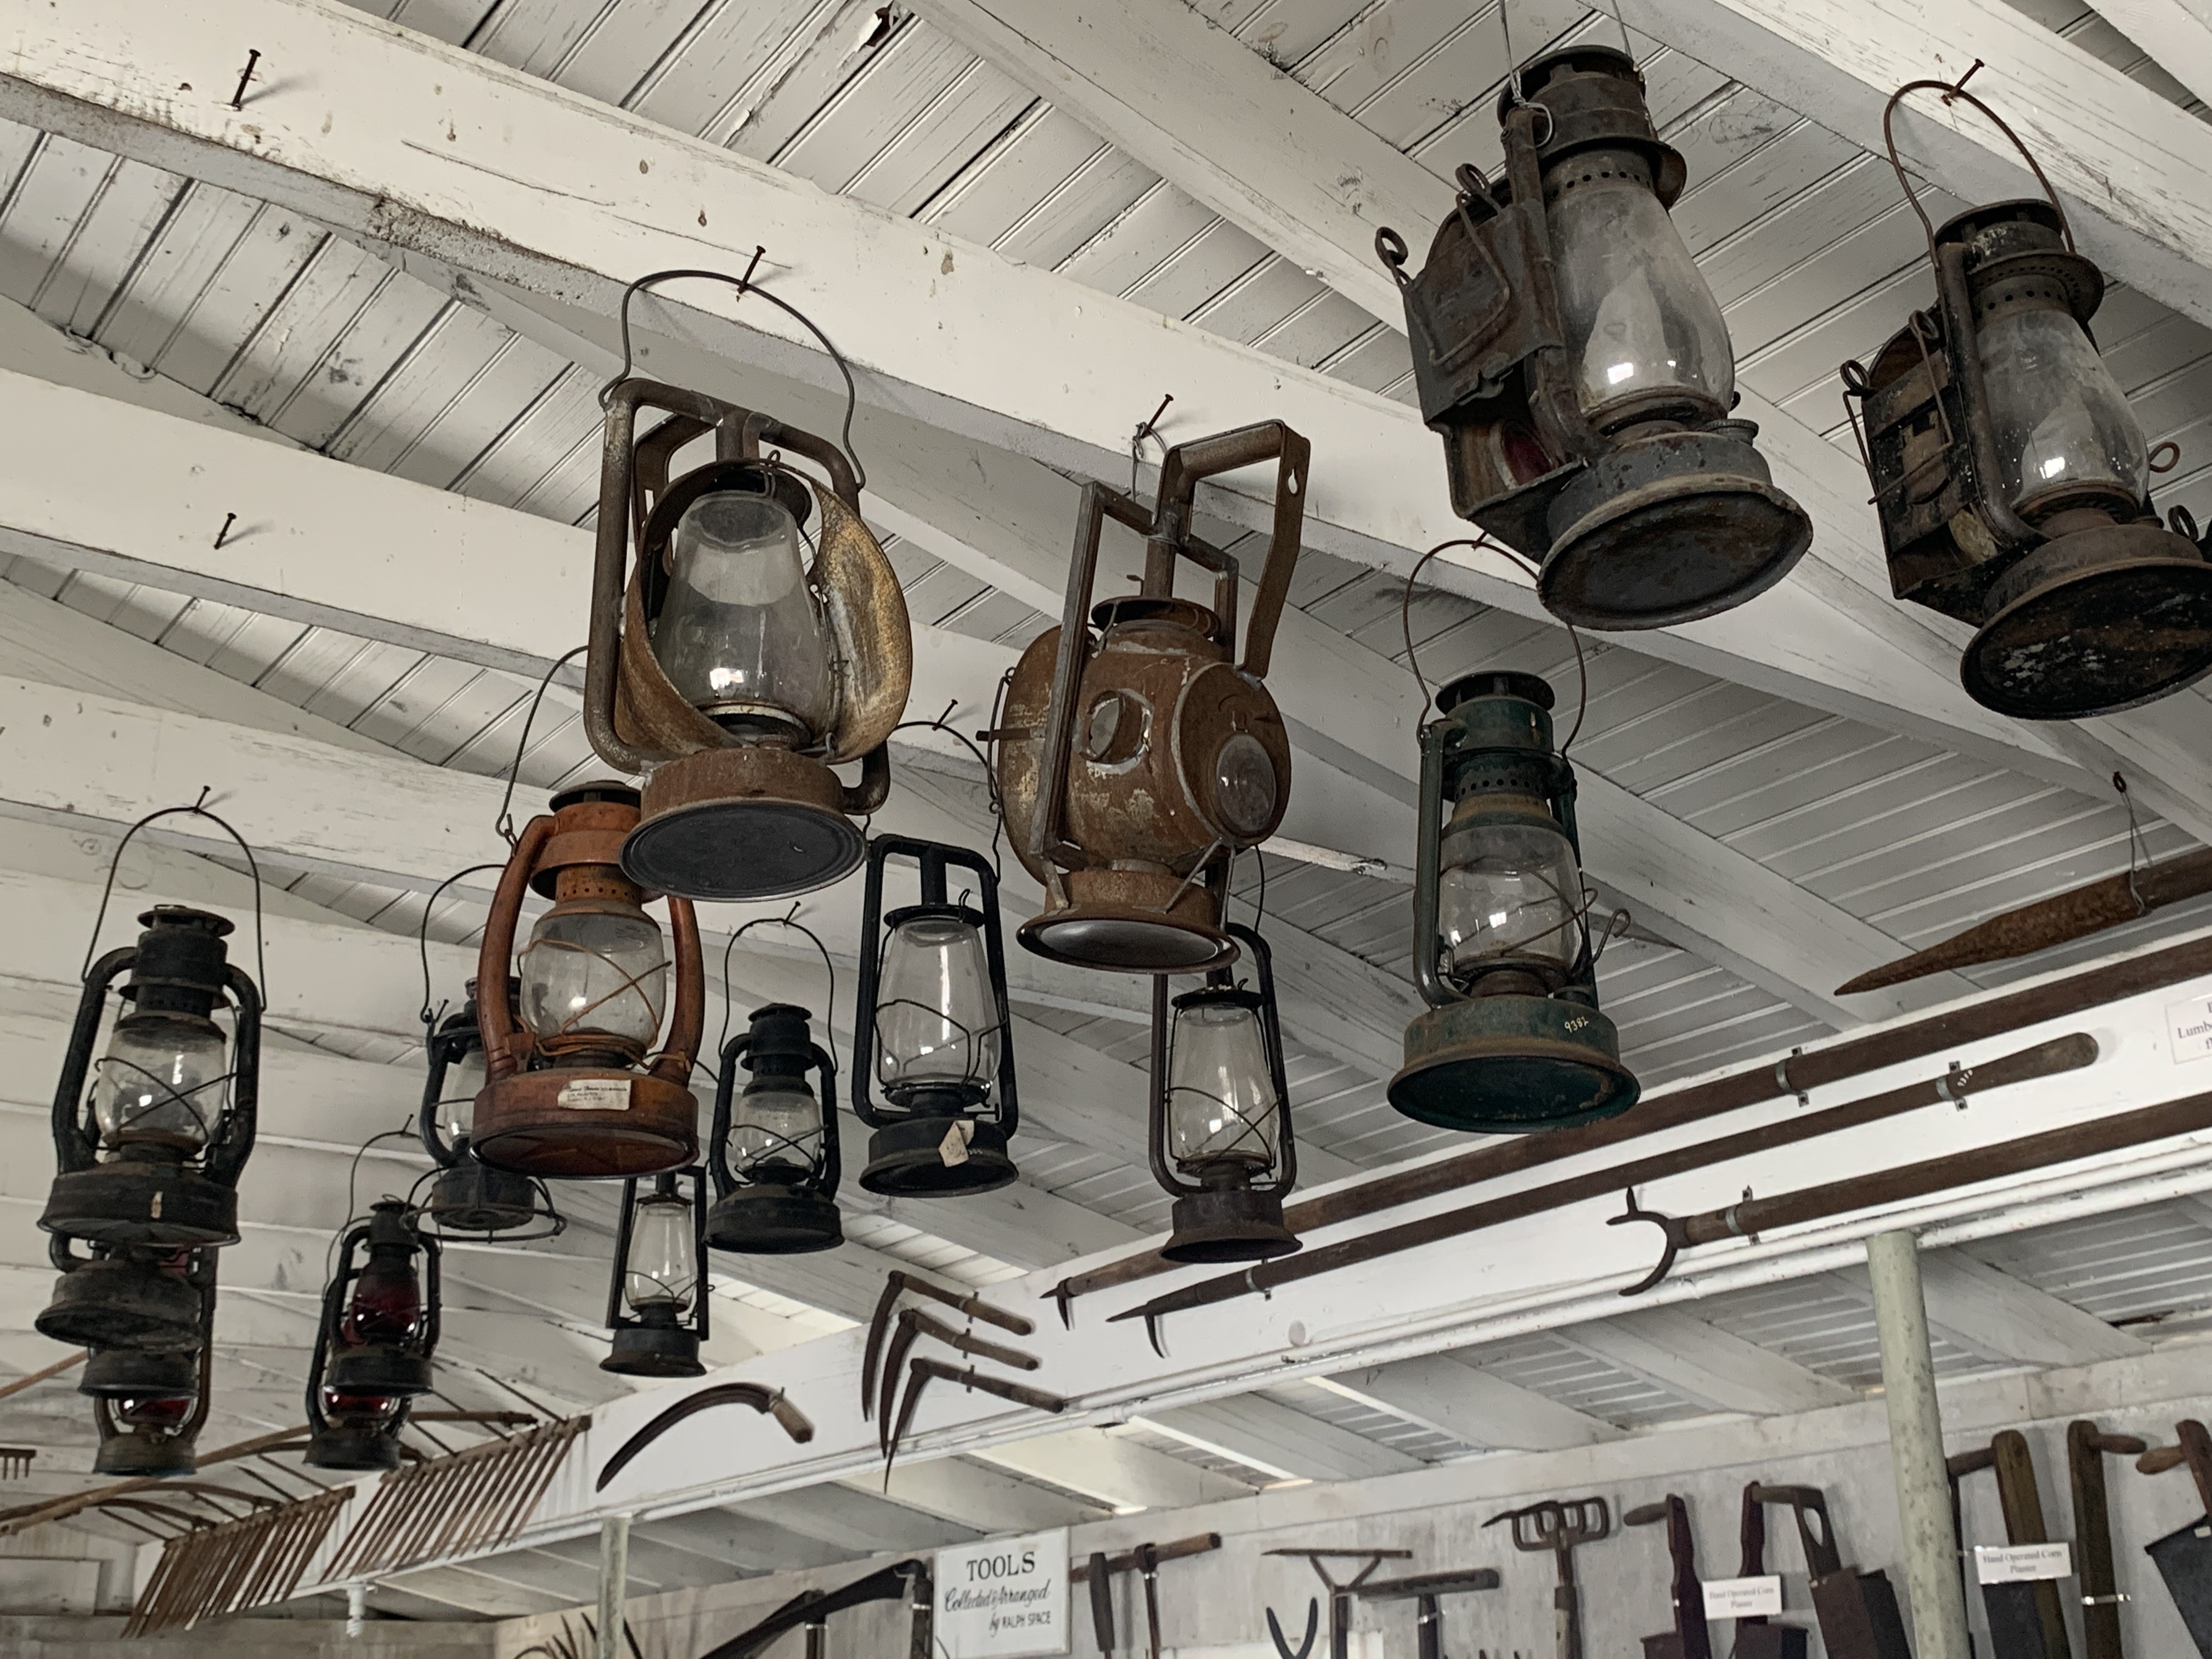 A collection of old lanterns. Photo courtesy of Space Farms.